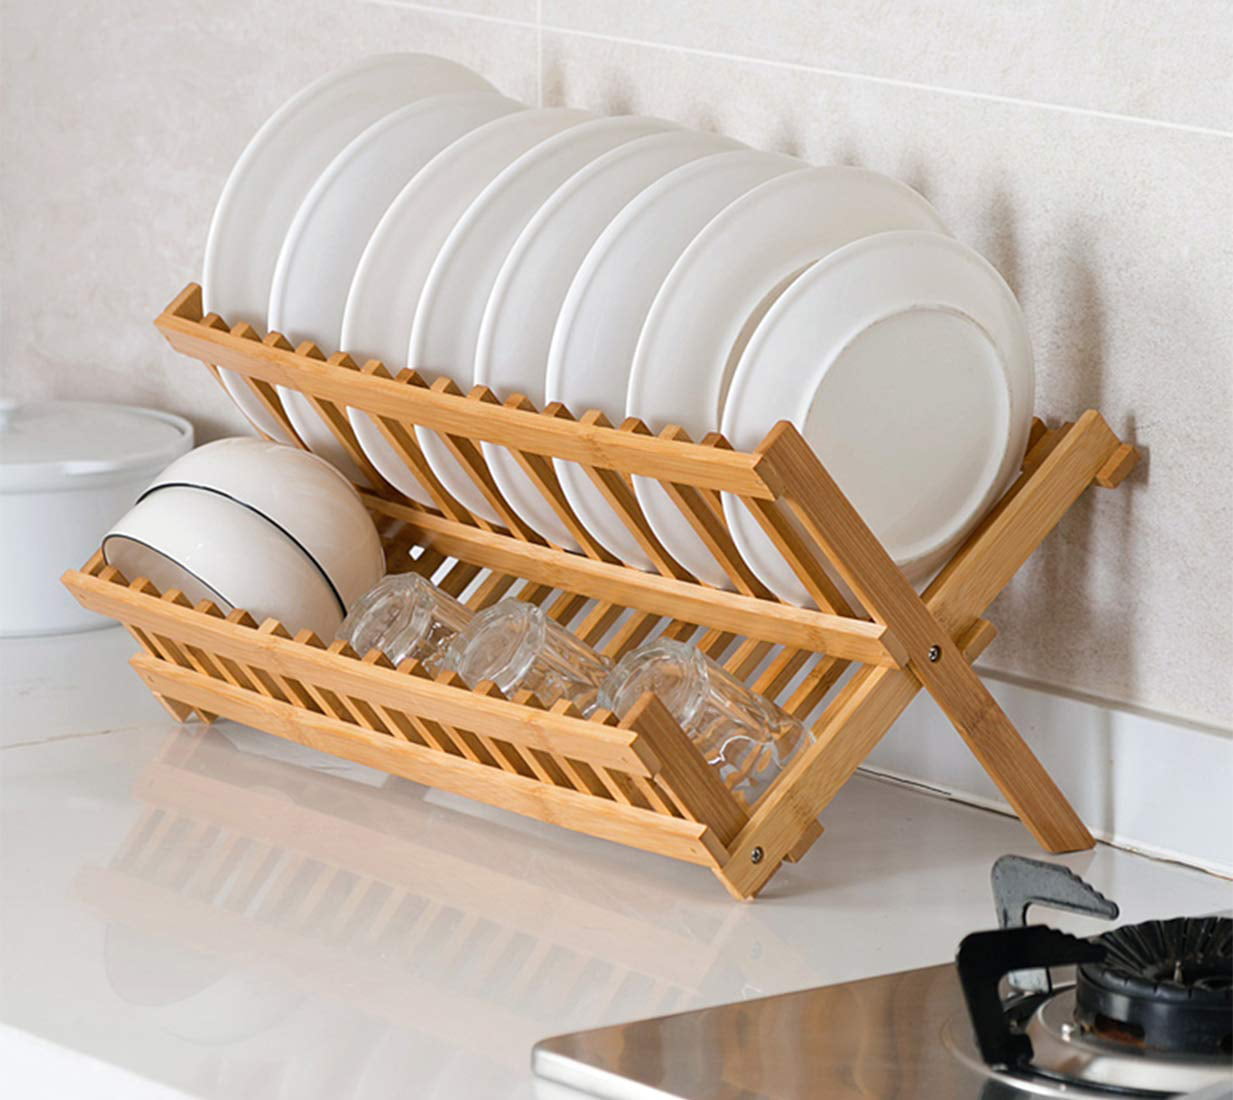 2 TIE DRAINER BAMBOO WOODEN DISH FOLD-ABLE RACK PLATES CUPS DRYER STORAGE HOLDER 